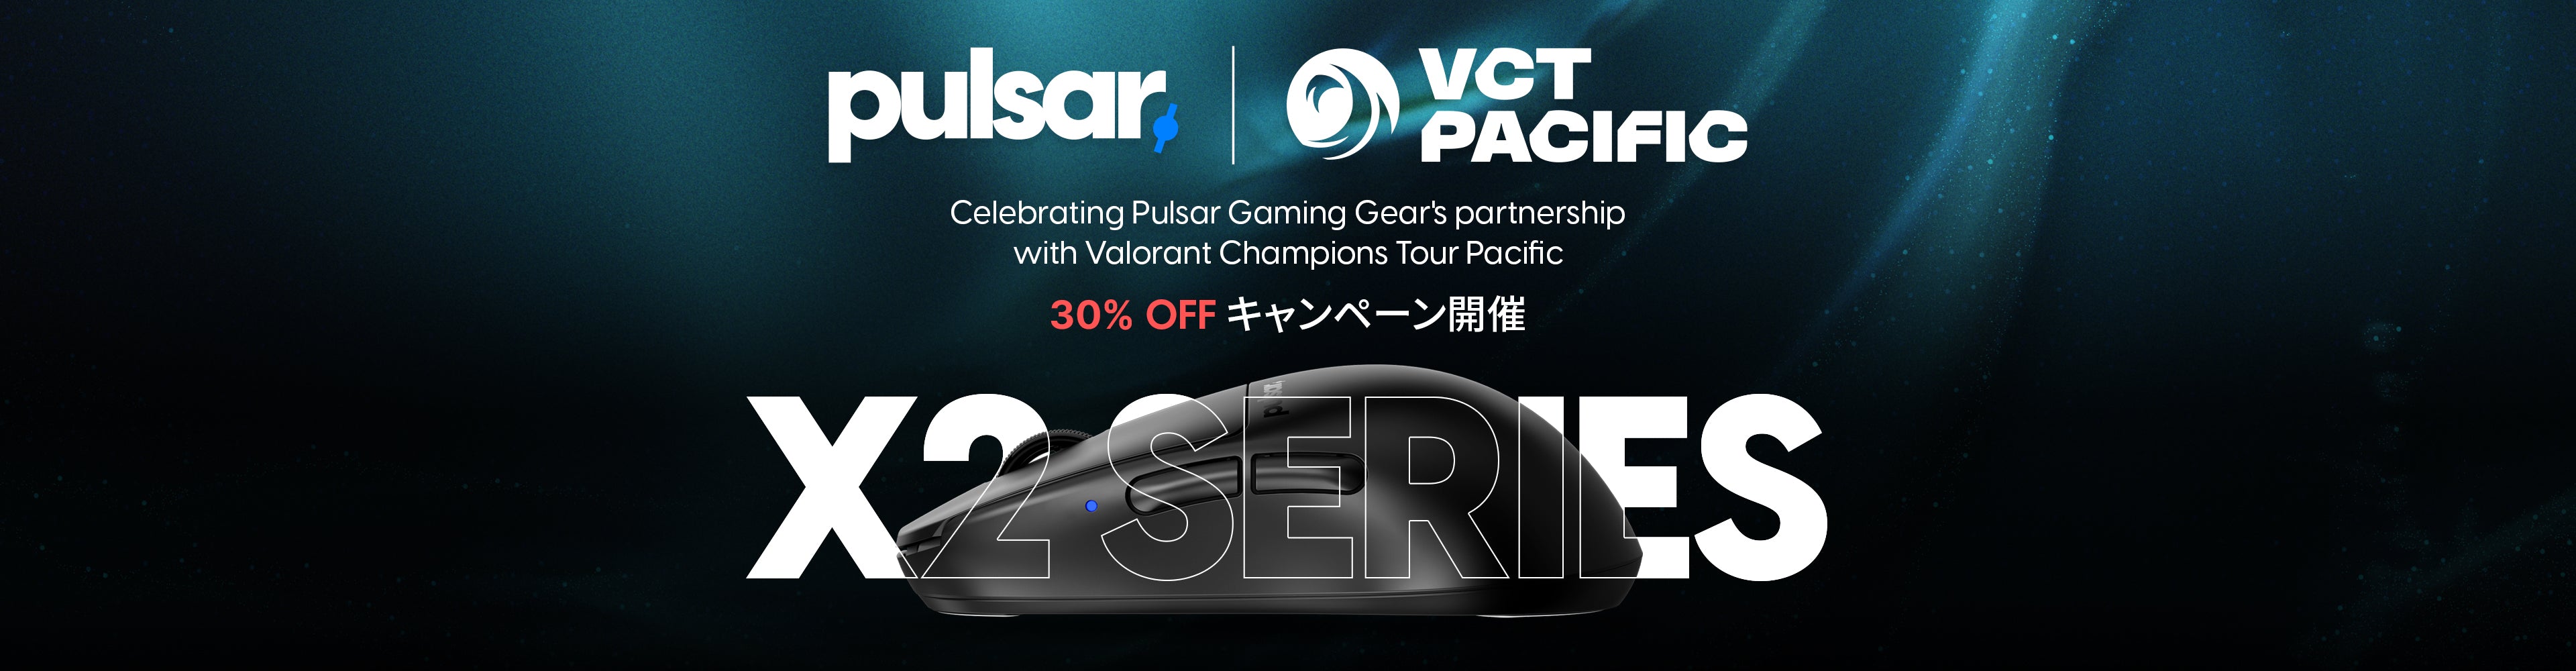 Pulsar x VCT pacific 2024 official partner